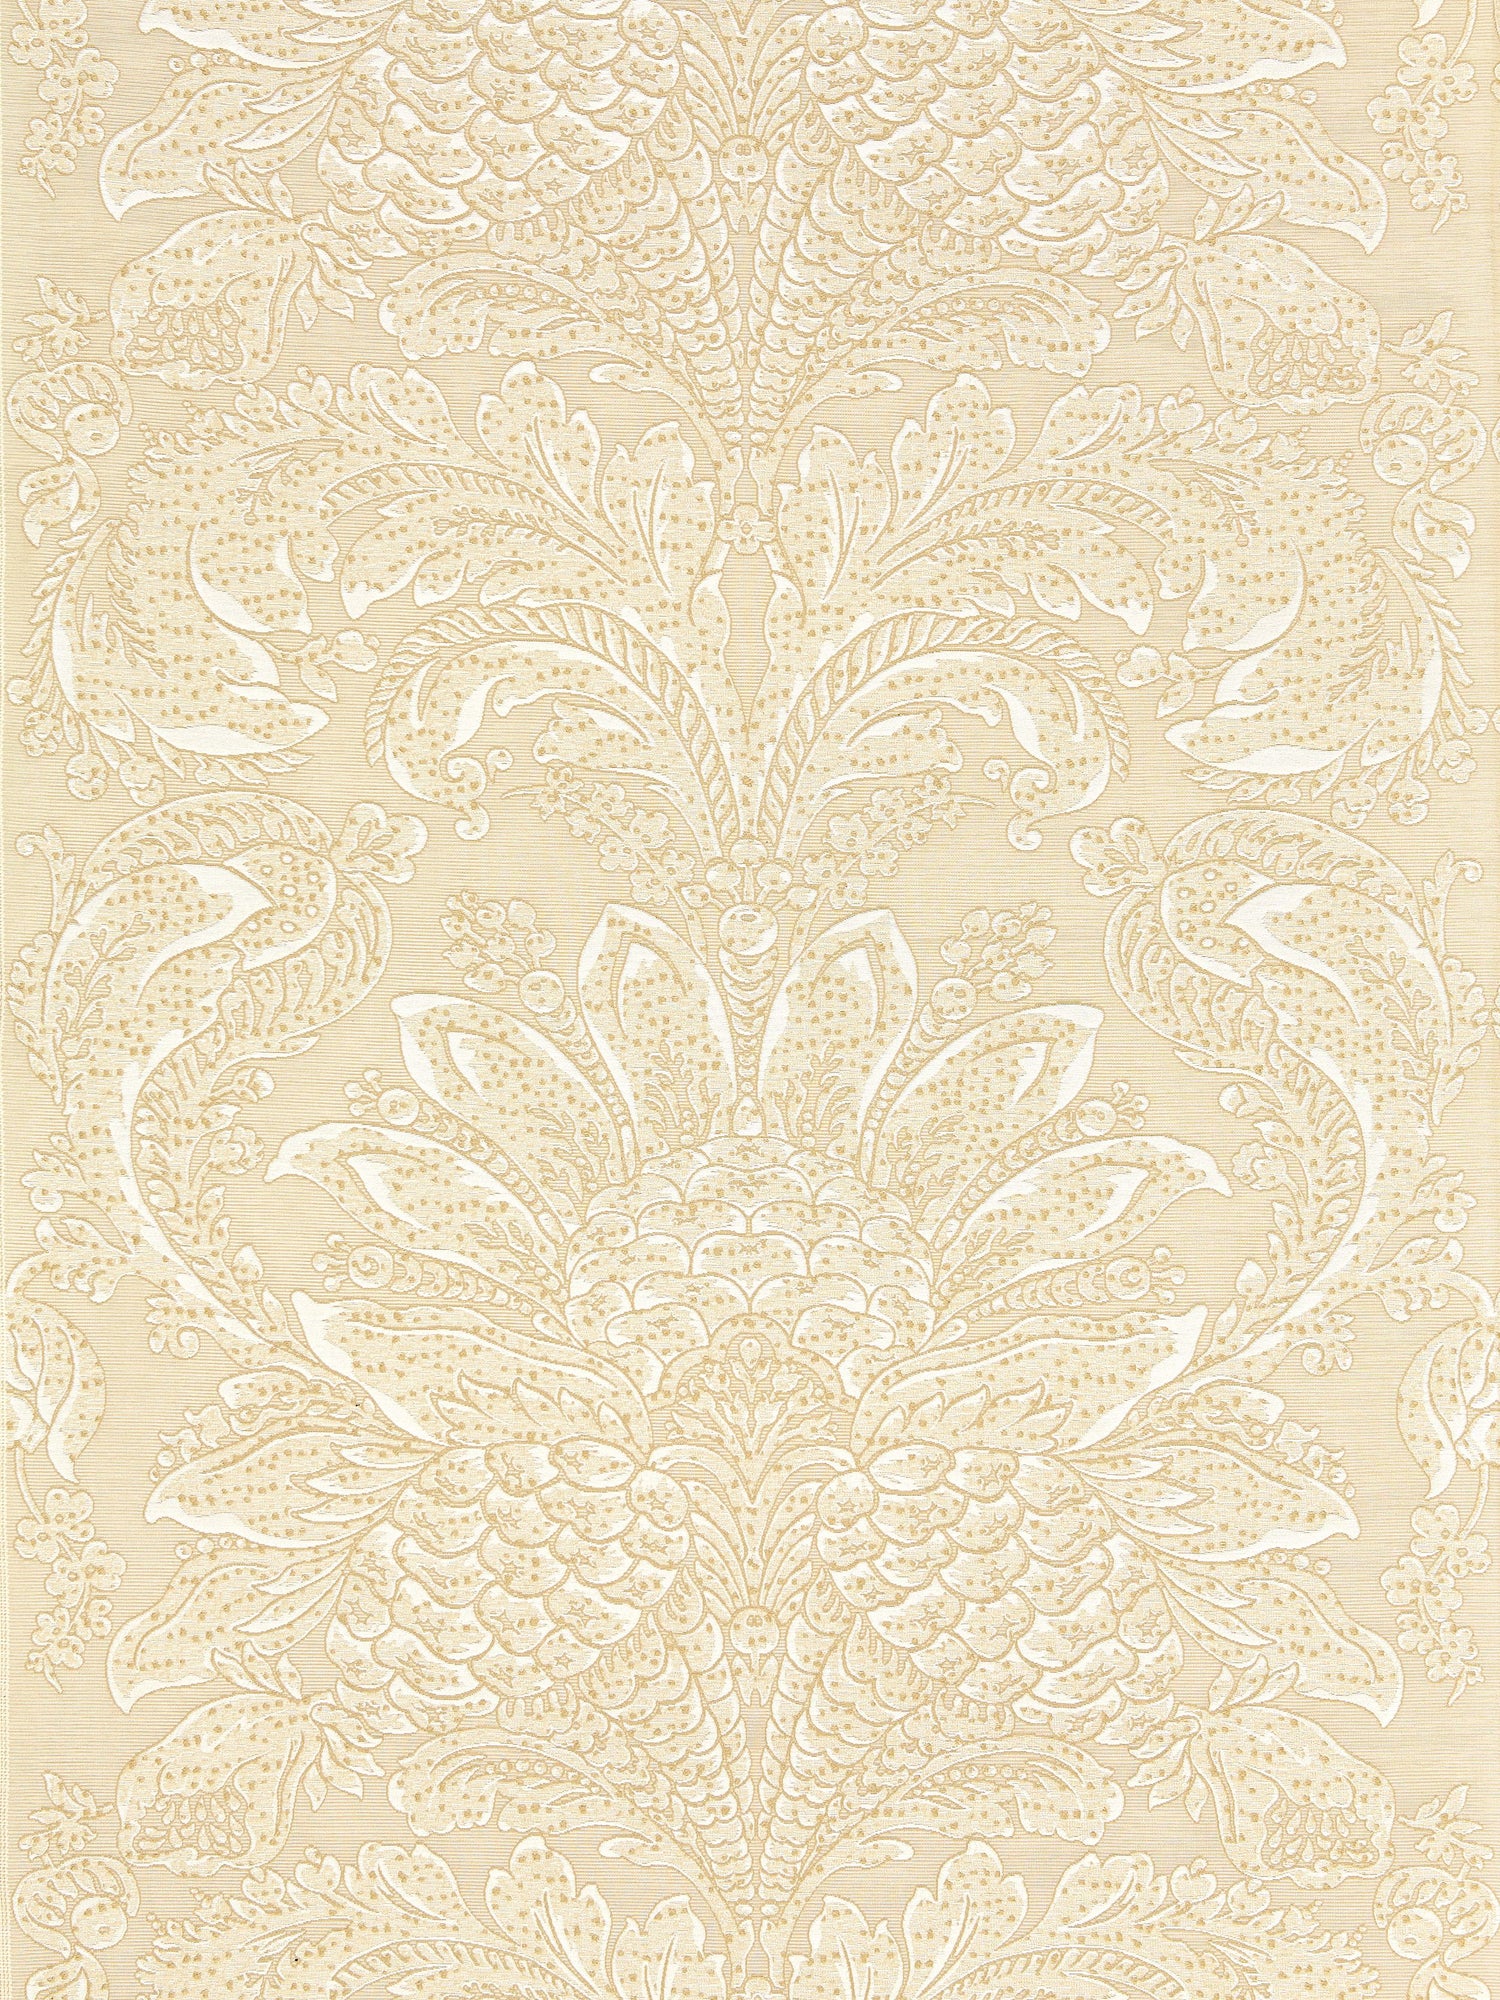 Carlotta Damask fabric in bisque color - pattern number SC 000127081 - by Scalamandre in the Scalamandre Fabrics Book 1 collection